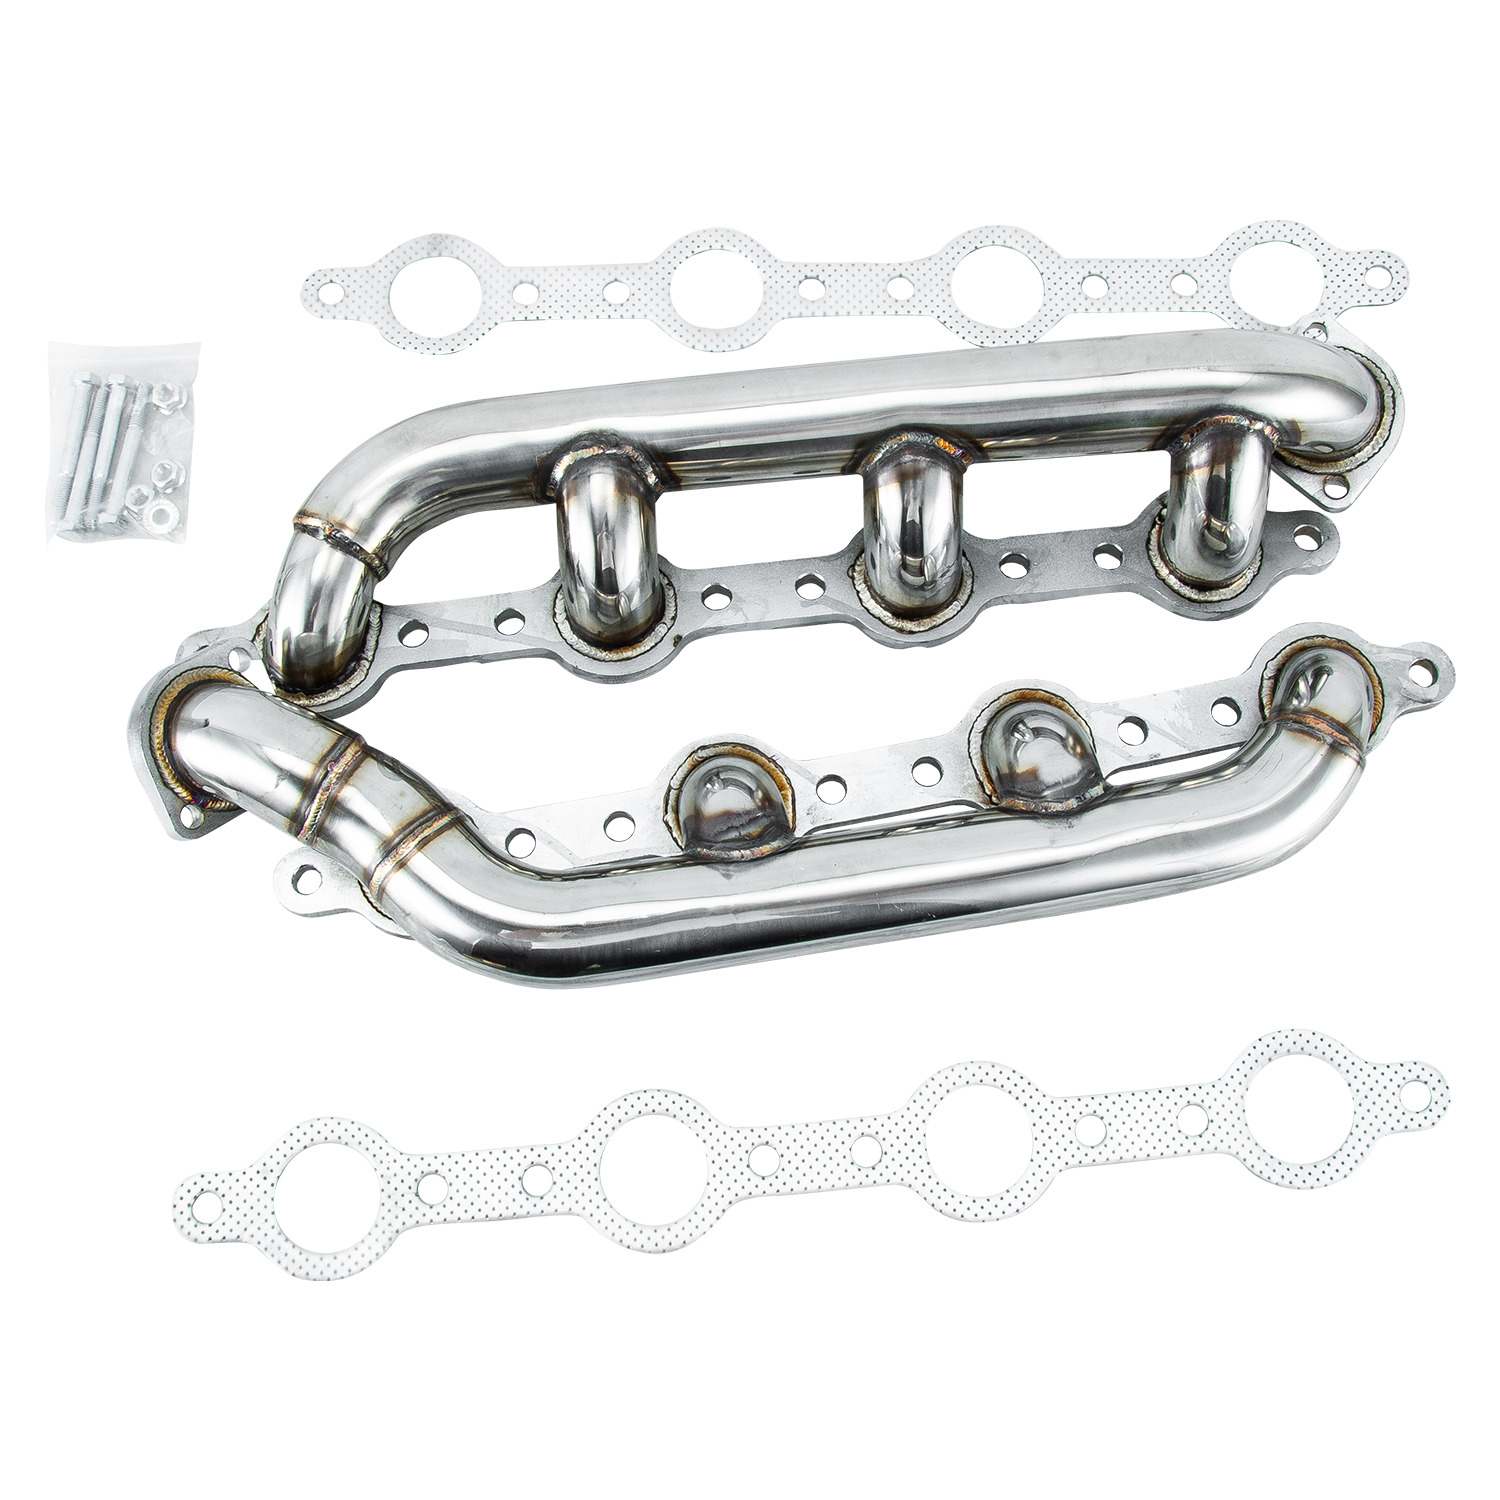 For 1999-2003 Ford F250 F350 F450 7.3L Stainless Steel Headers Manifolds